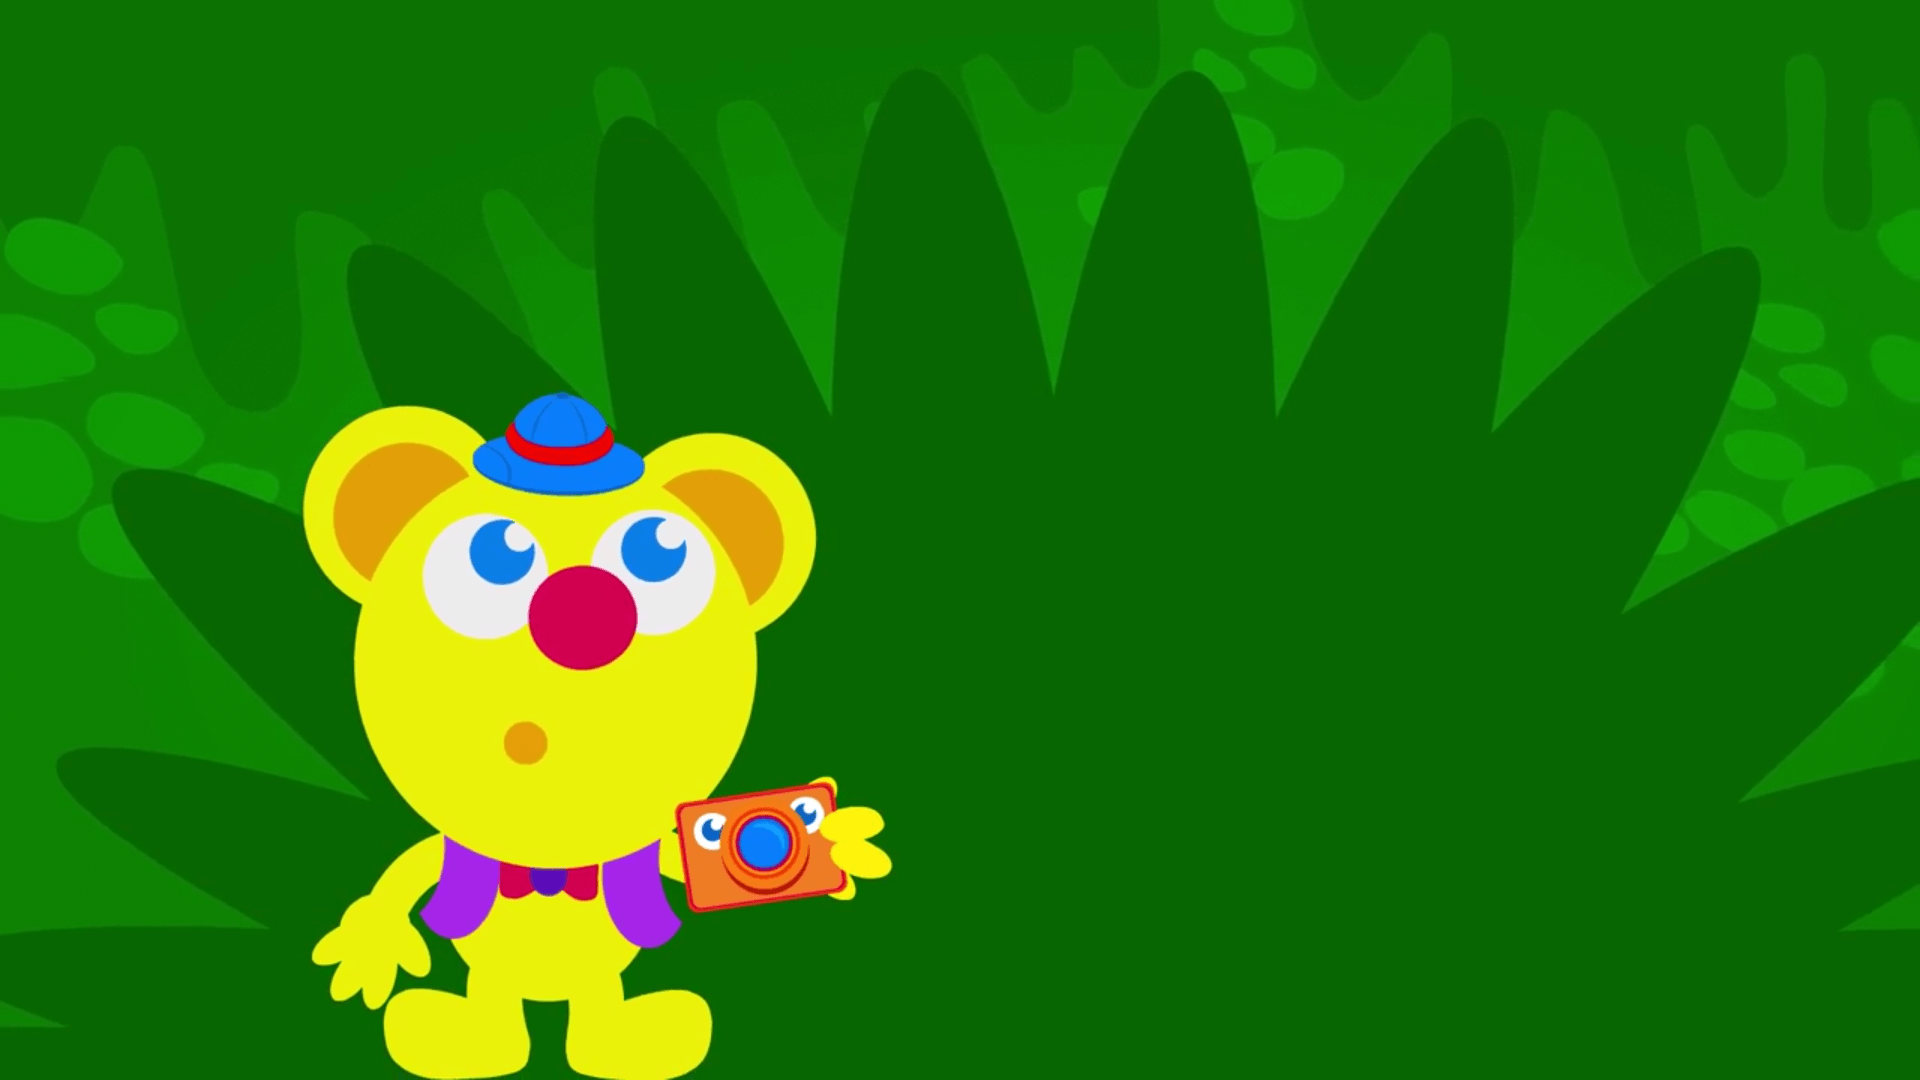 freddy hears a noise in the jungle episode of the kneebouncers show on babyfirsttv